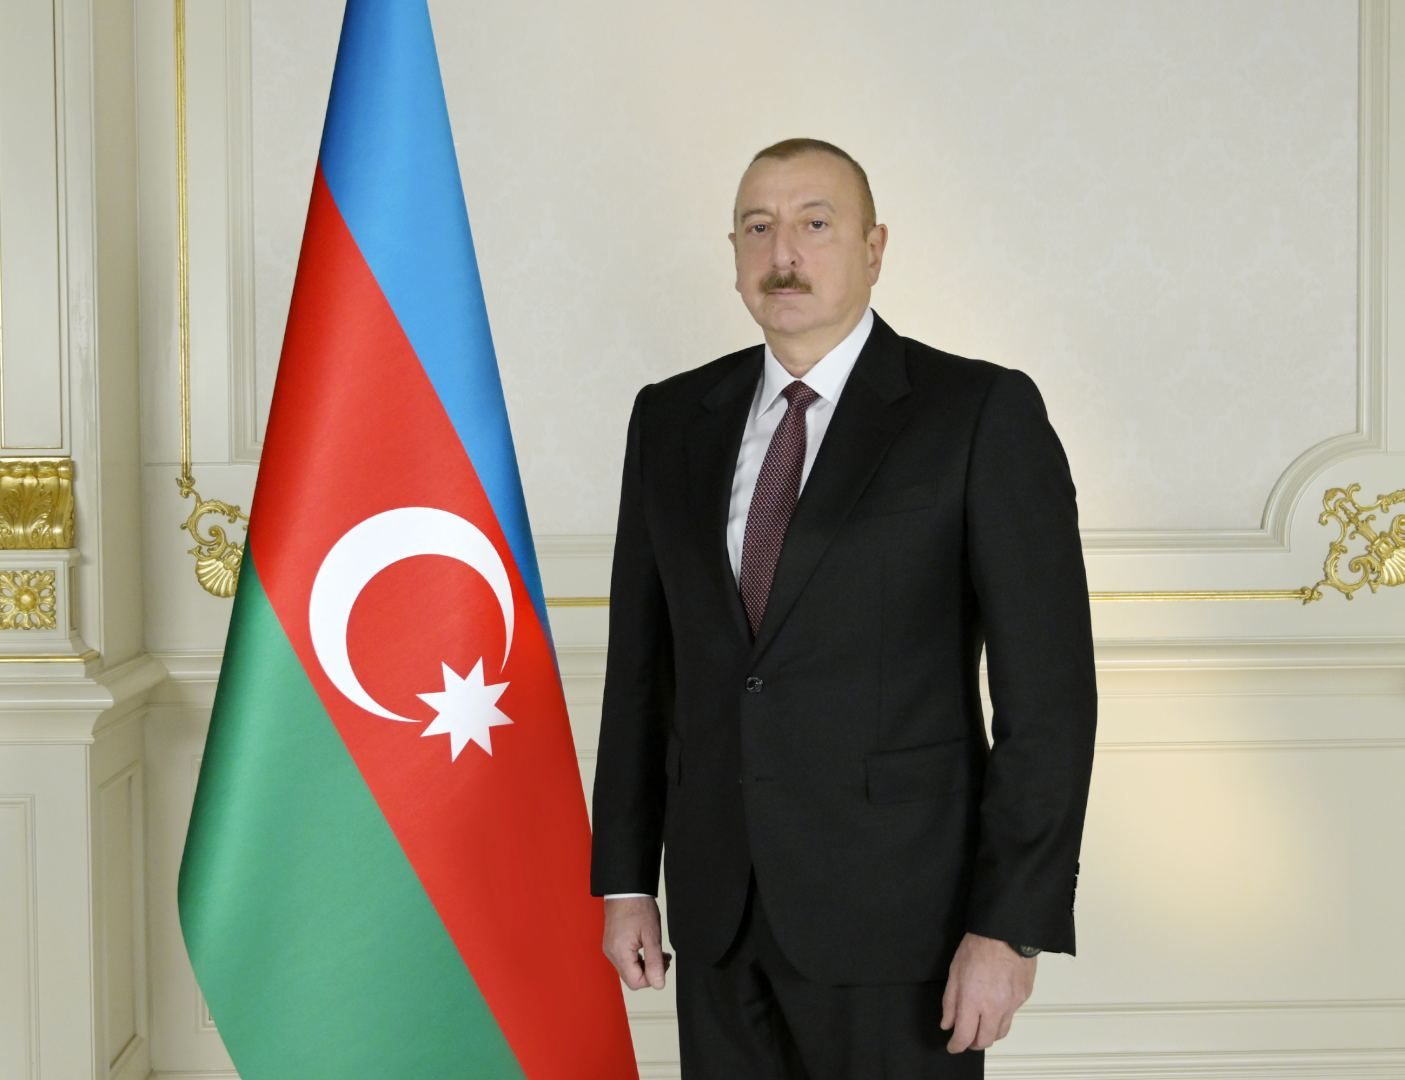 Agreement between Azerbaijan, Russia on countering terrorism approved